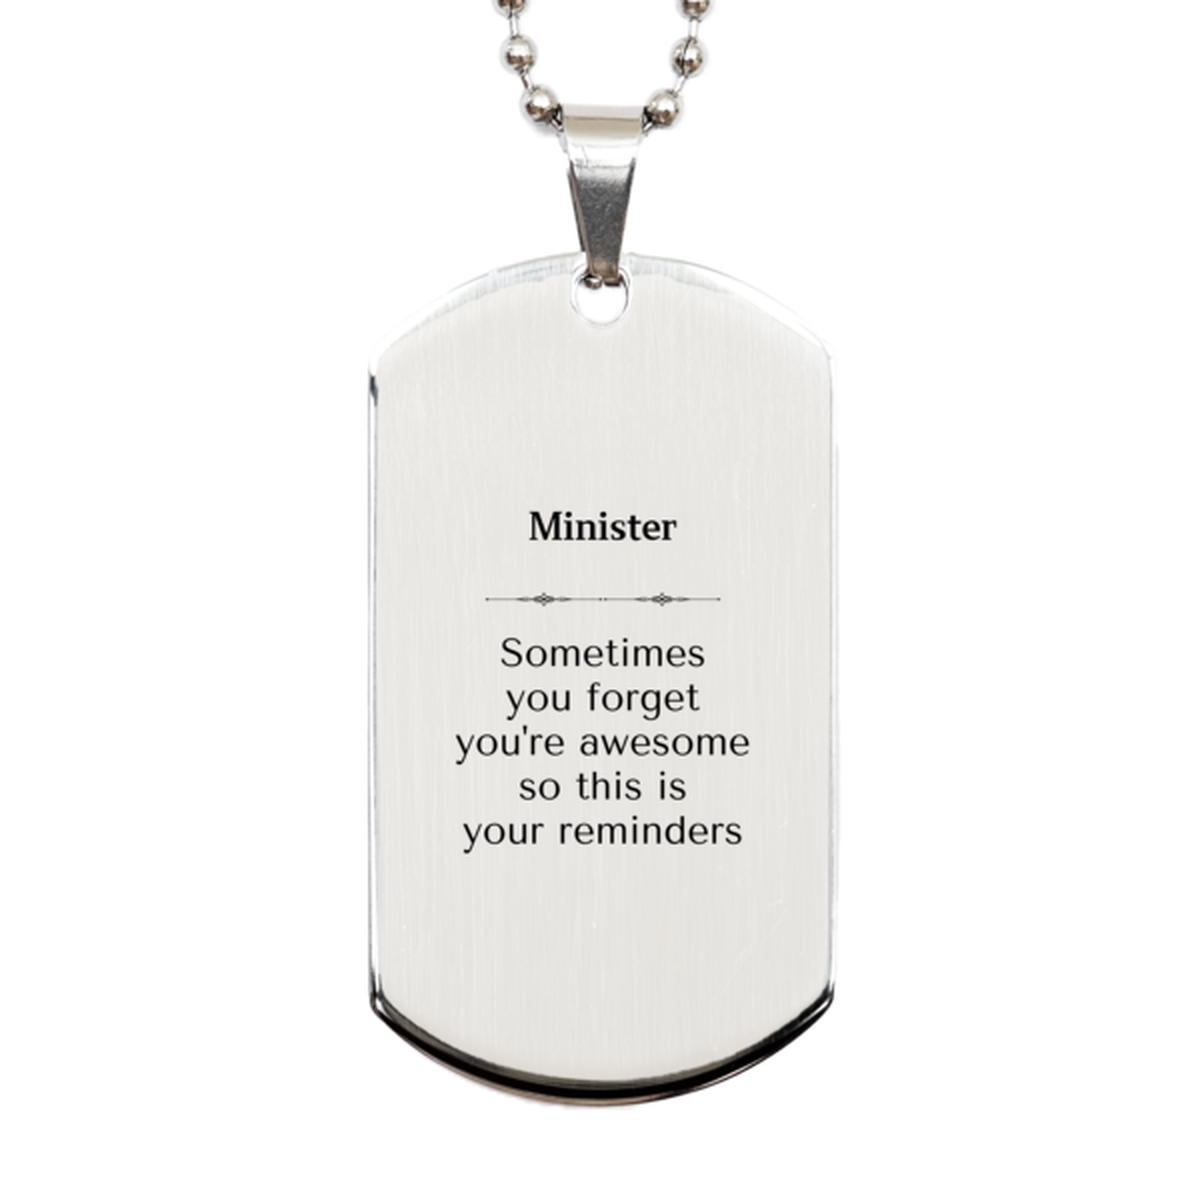 Sentimental Minister Silver Dog Tag, Minister Sometimes you forget you're awesome so this is your reminders, Graduation Christmas Birthday Gifts for Minister, Men, Women, Coworkers